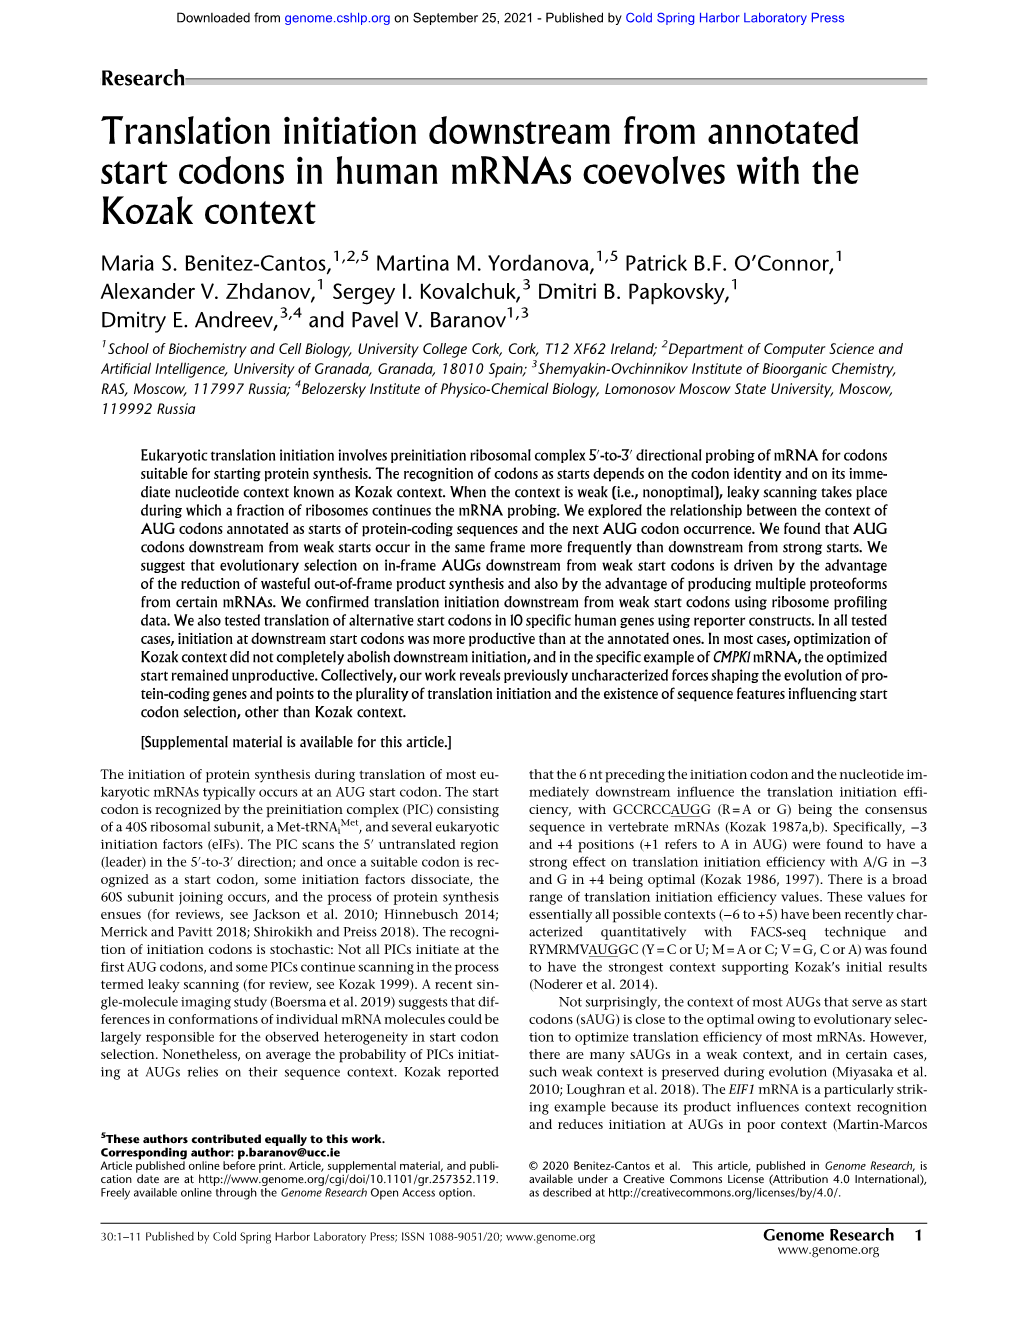 Translation Initiation Downstream from Annotated Start Codons in Human Mrnas Coevolves with the Kozak Context